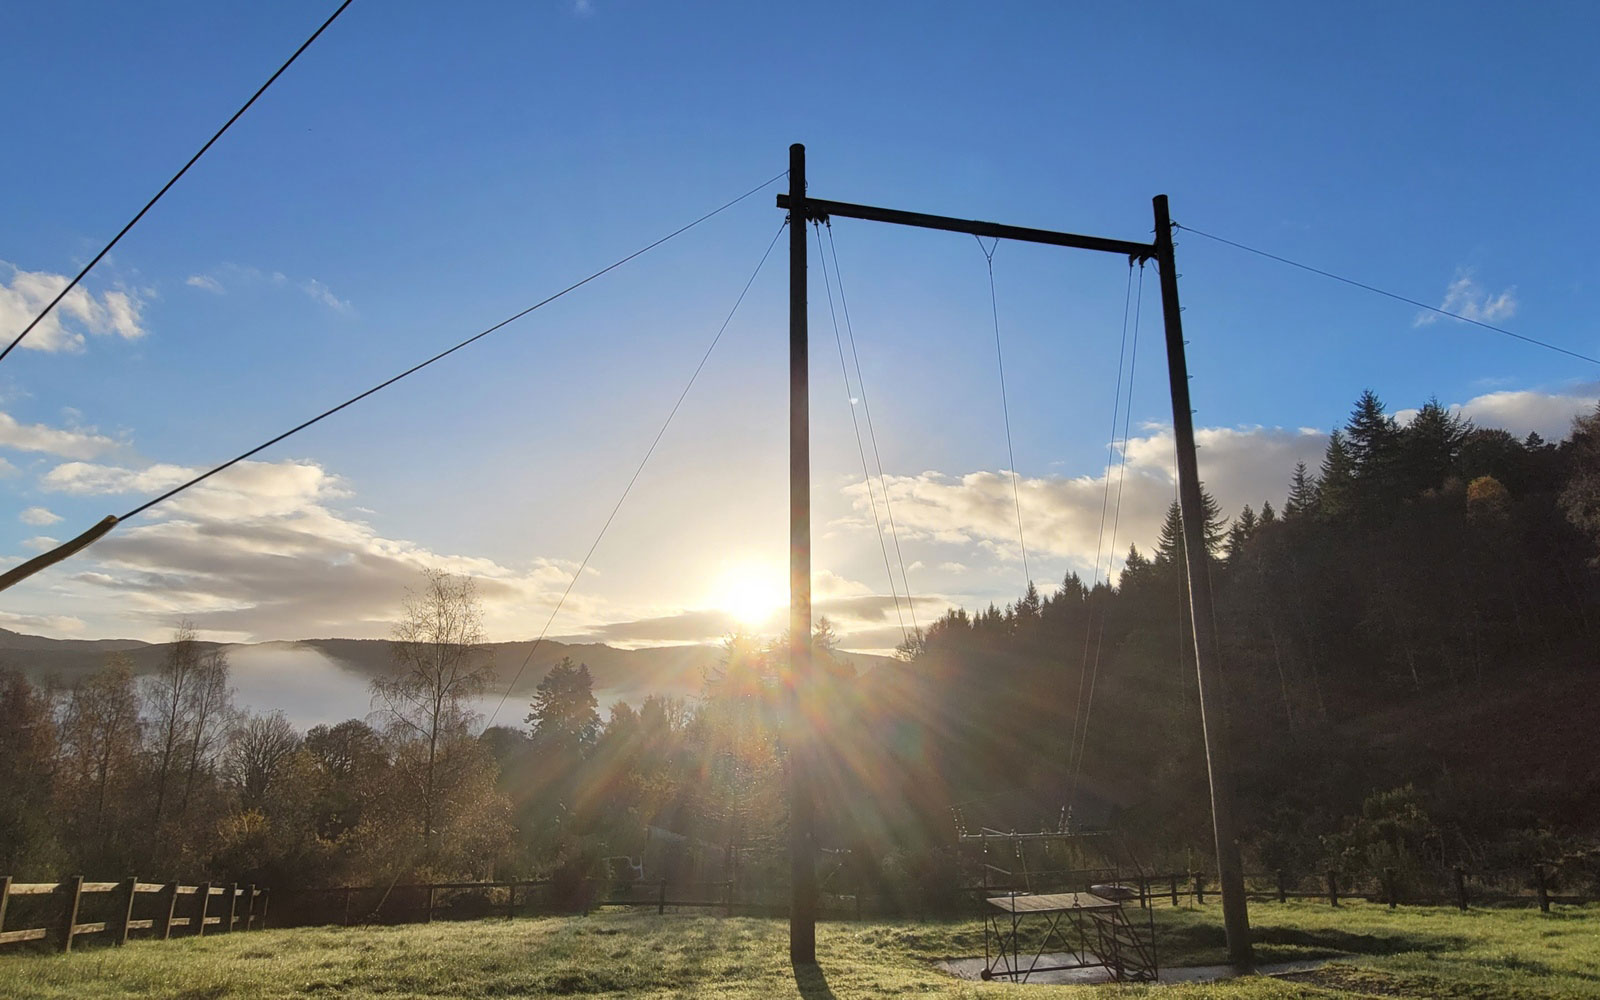 The giant swing, an activity base at PGL Dalguise in Perthshire